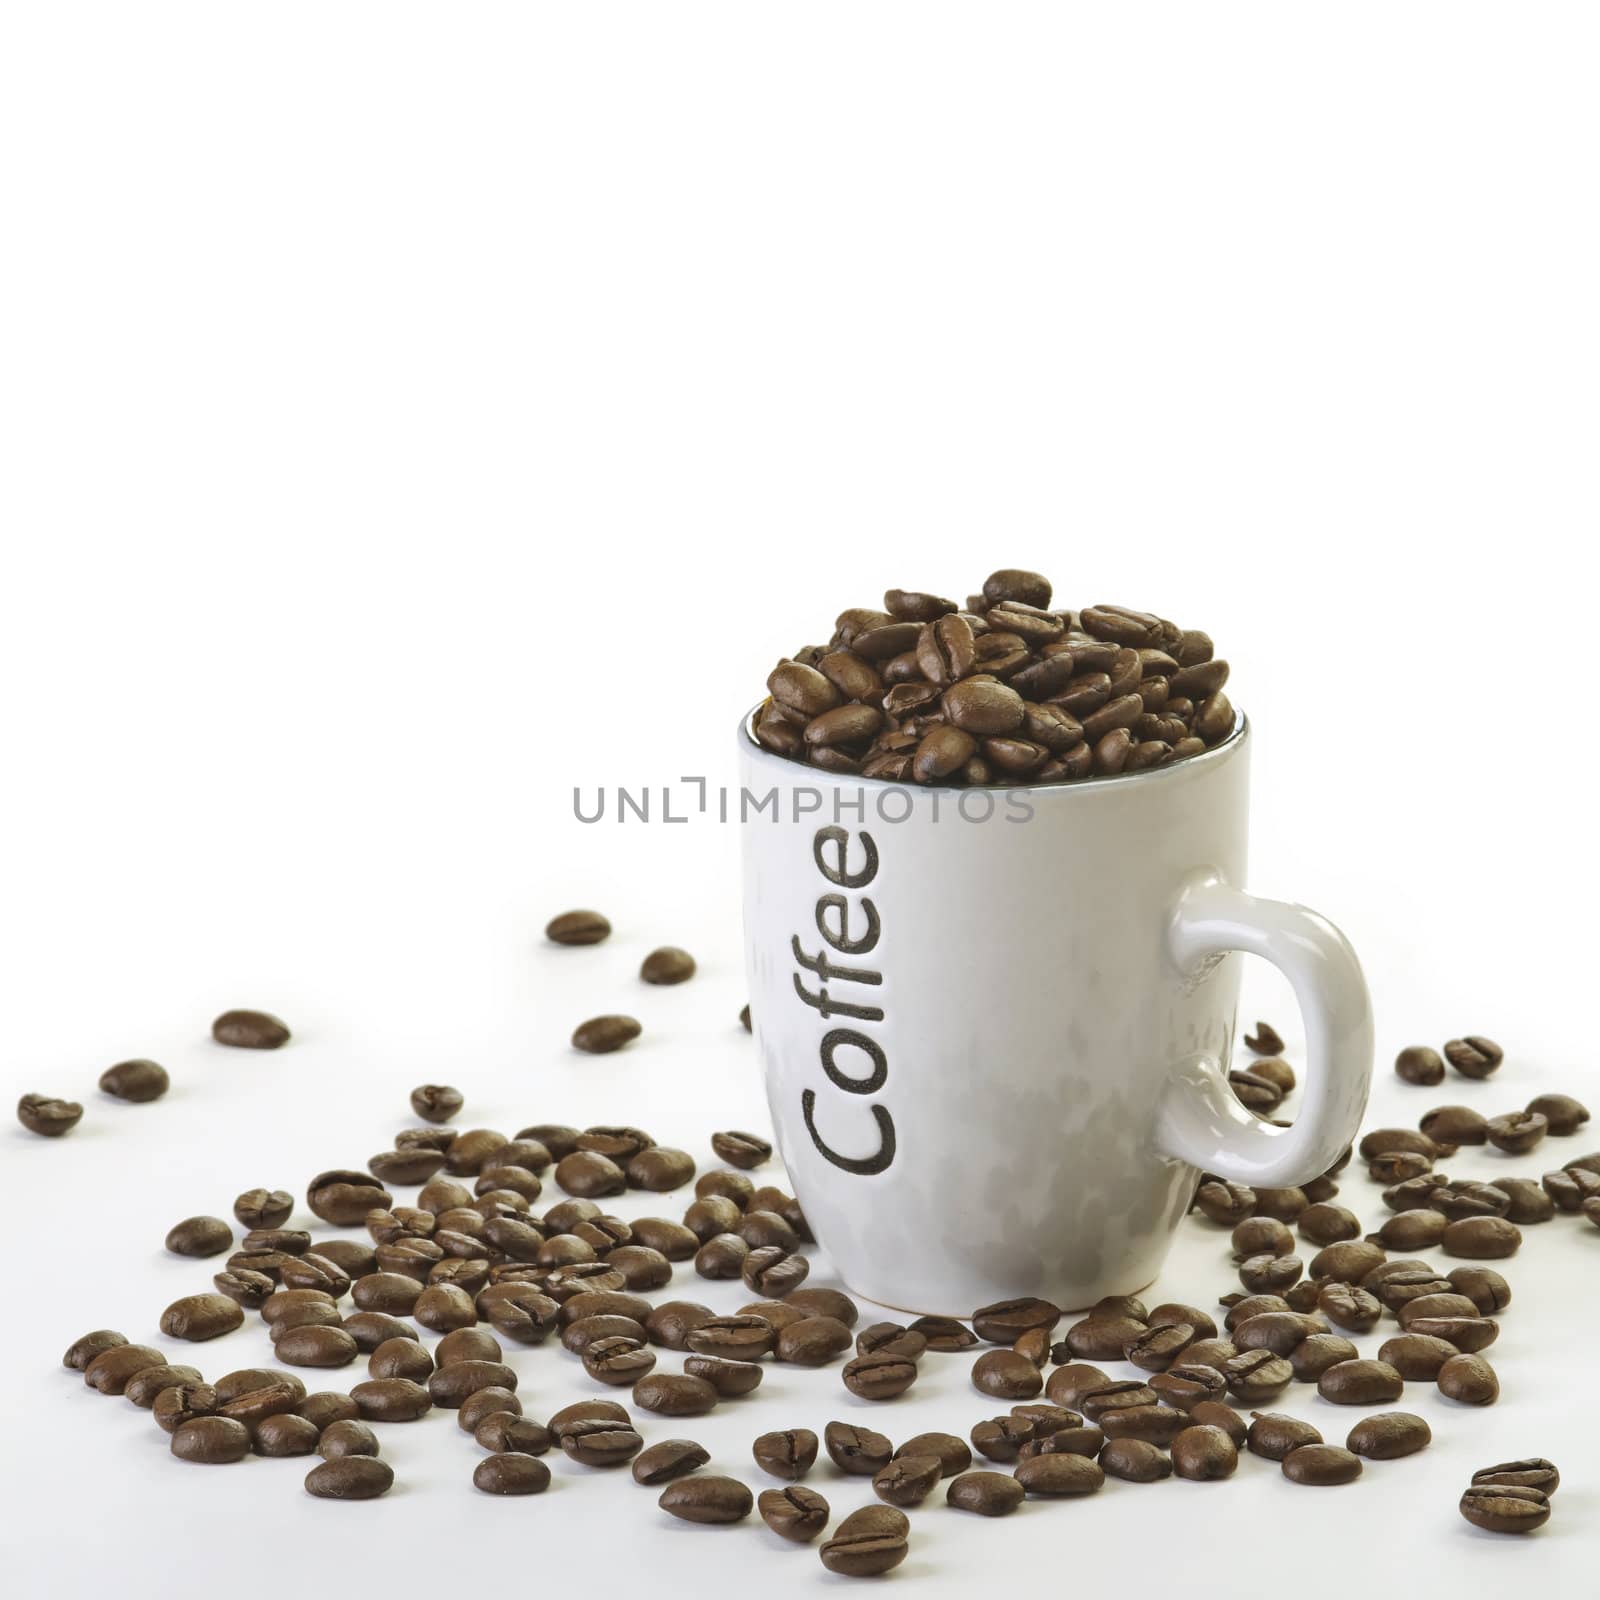 Cup full of Coffee beans with white background.